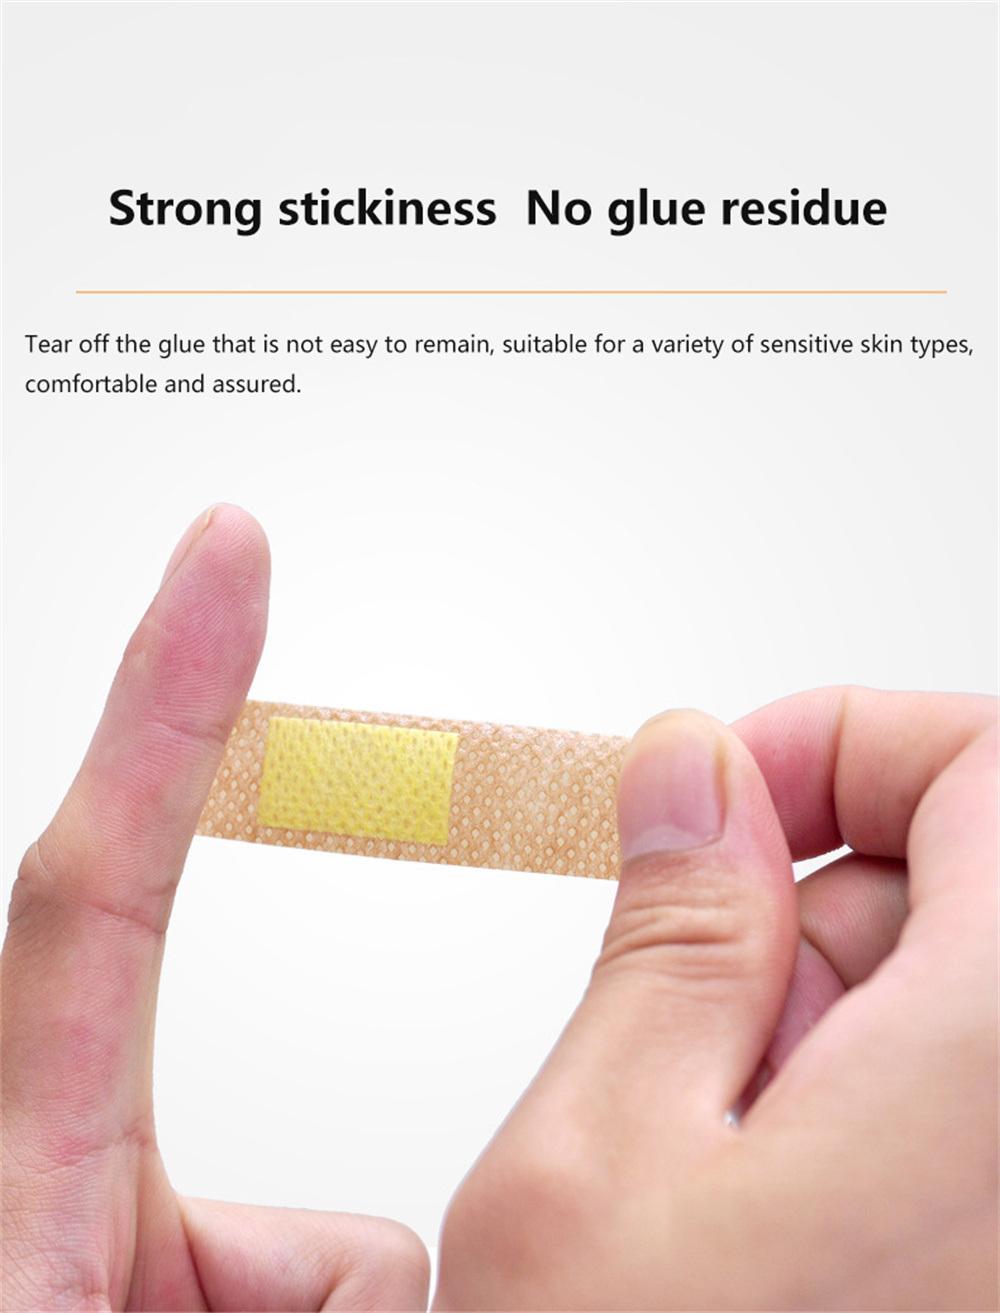 Waterproof Plastic Band-Aid Medical First Aid Adhesive Bandage Adhesive Strips Adhesive Plaster